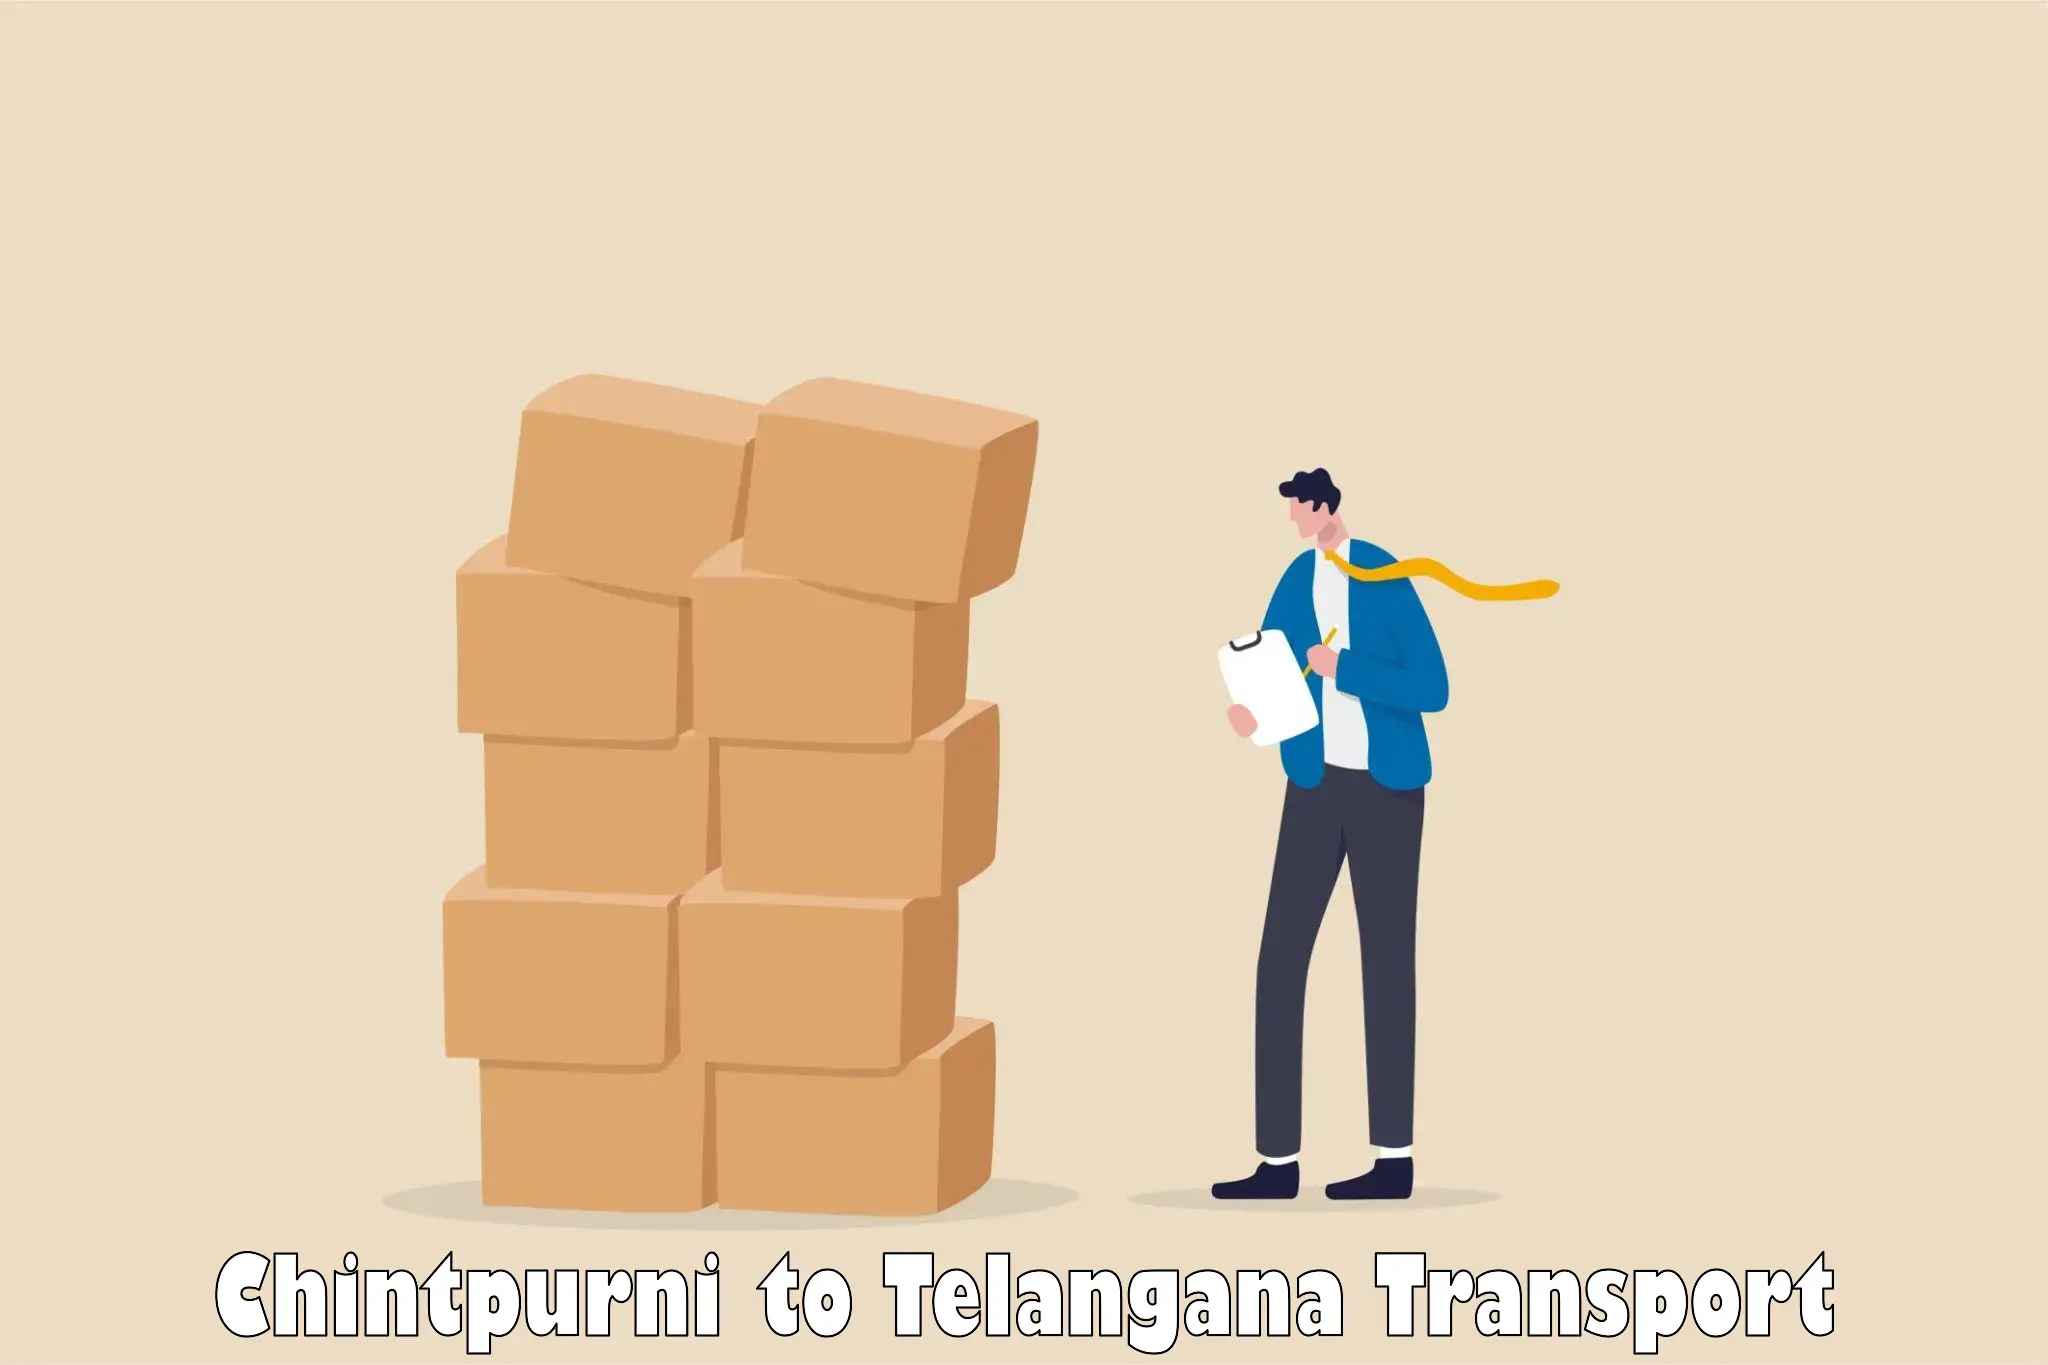 Luggage transport services in Chintpurni to Mominpet